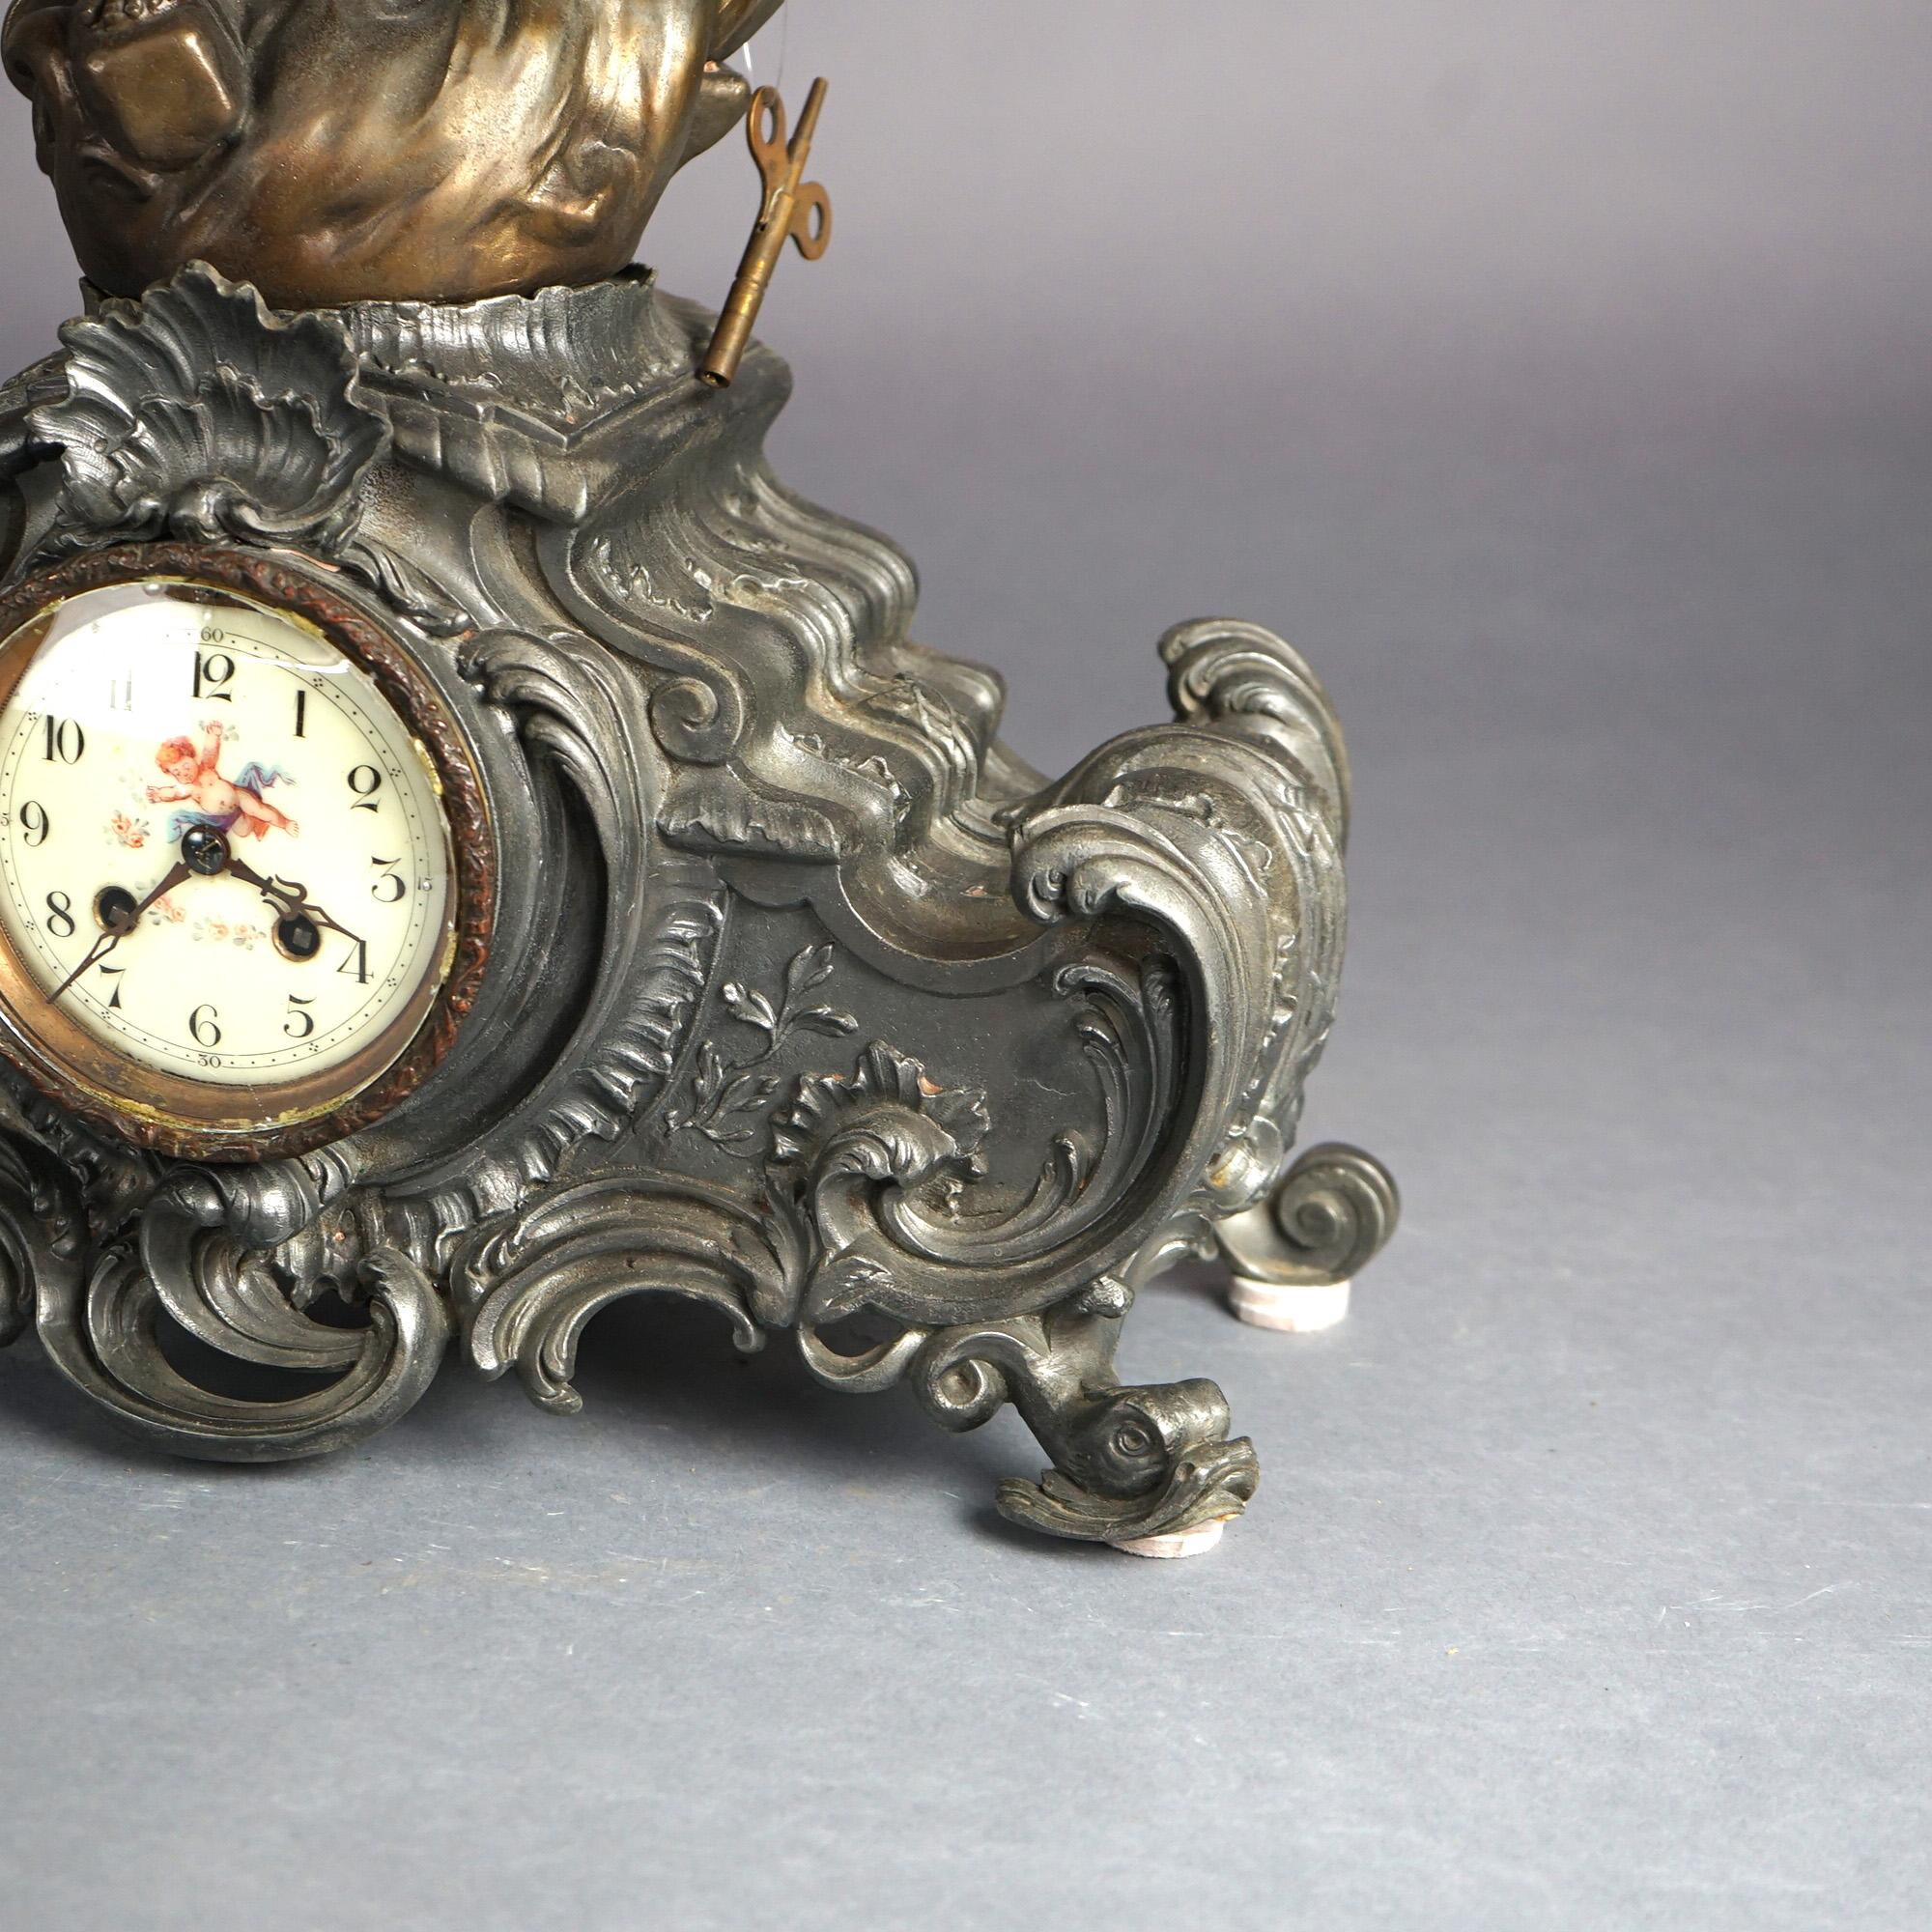 Antique Rococo Revival Bronzed Metal Figural Mantle Clock Signed Rancoulet C1890 2